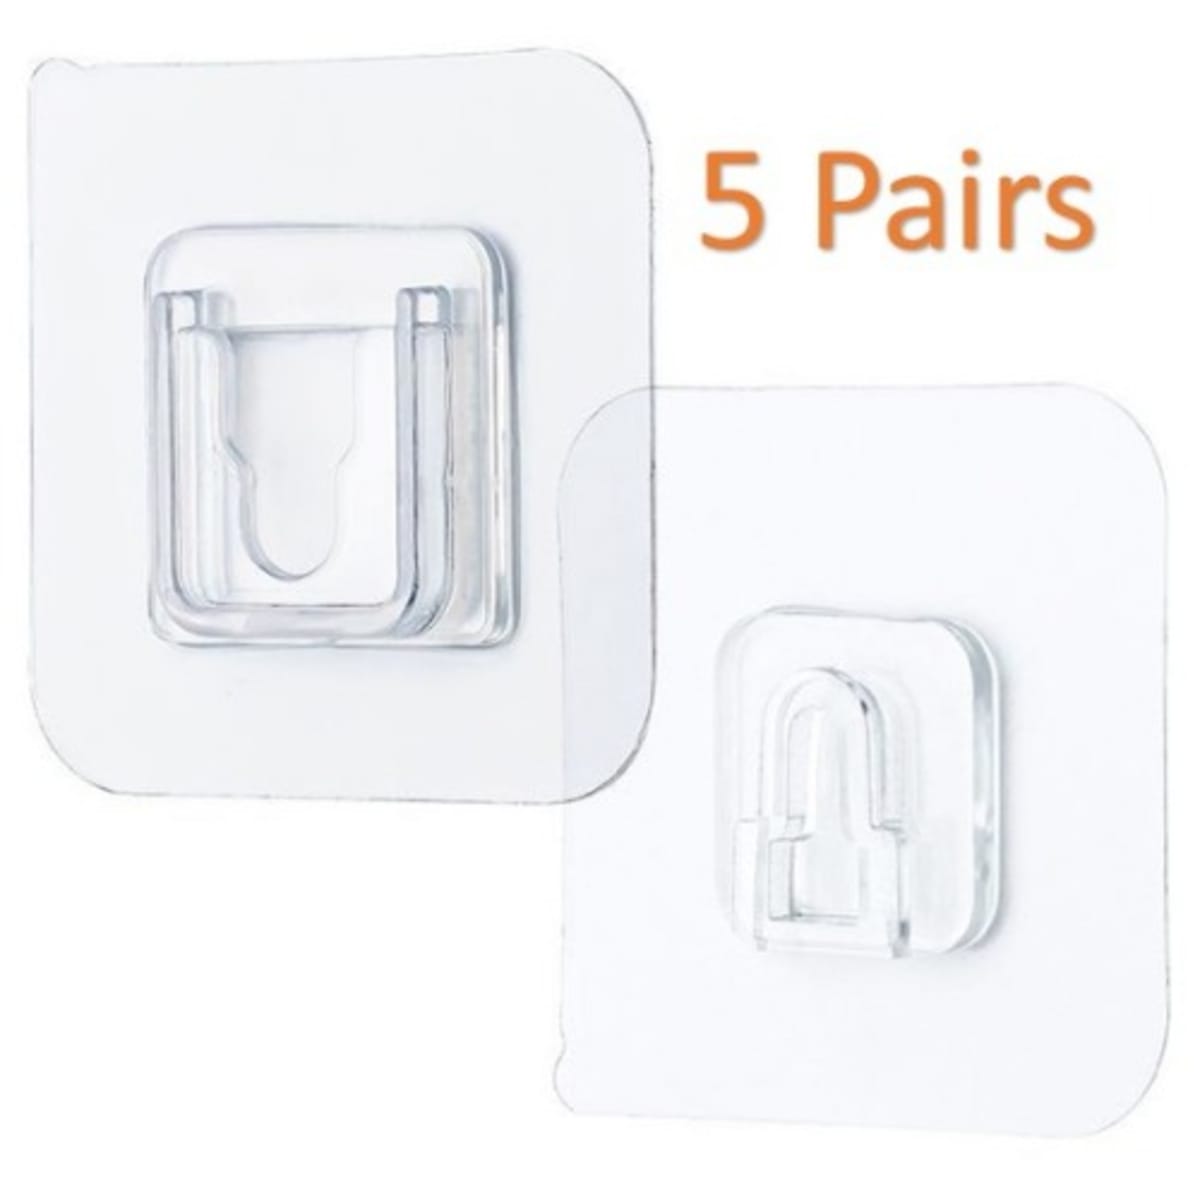 Rhydin Double Sided Wall Hooks 10 Pcs-Self Adhesive Hooks for Wall Hanging  Hook Hook 10 Price in India - Buy Rhydin Double Sided Wall Hooks 10  Pcs-Self Adhesive Hooks for Wall Hanging